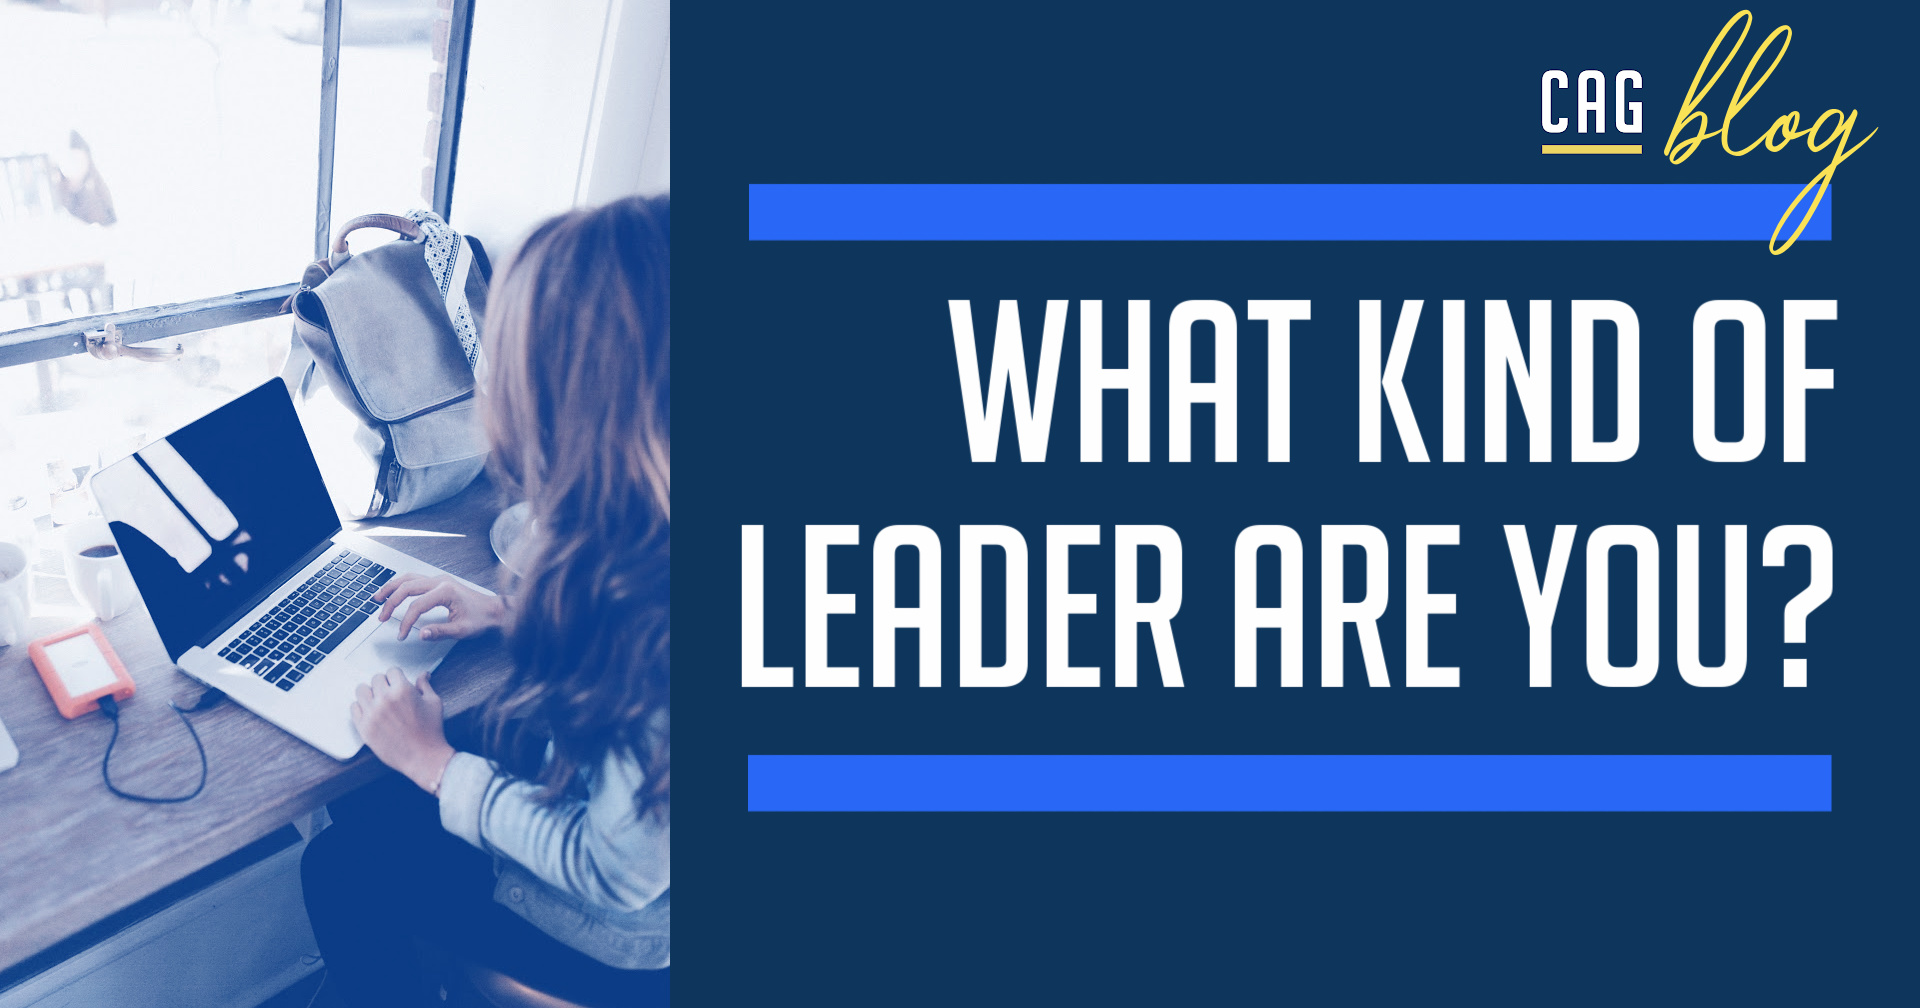 What kind of leader are you? Daring Leadership Series Part 1